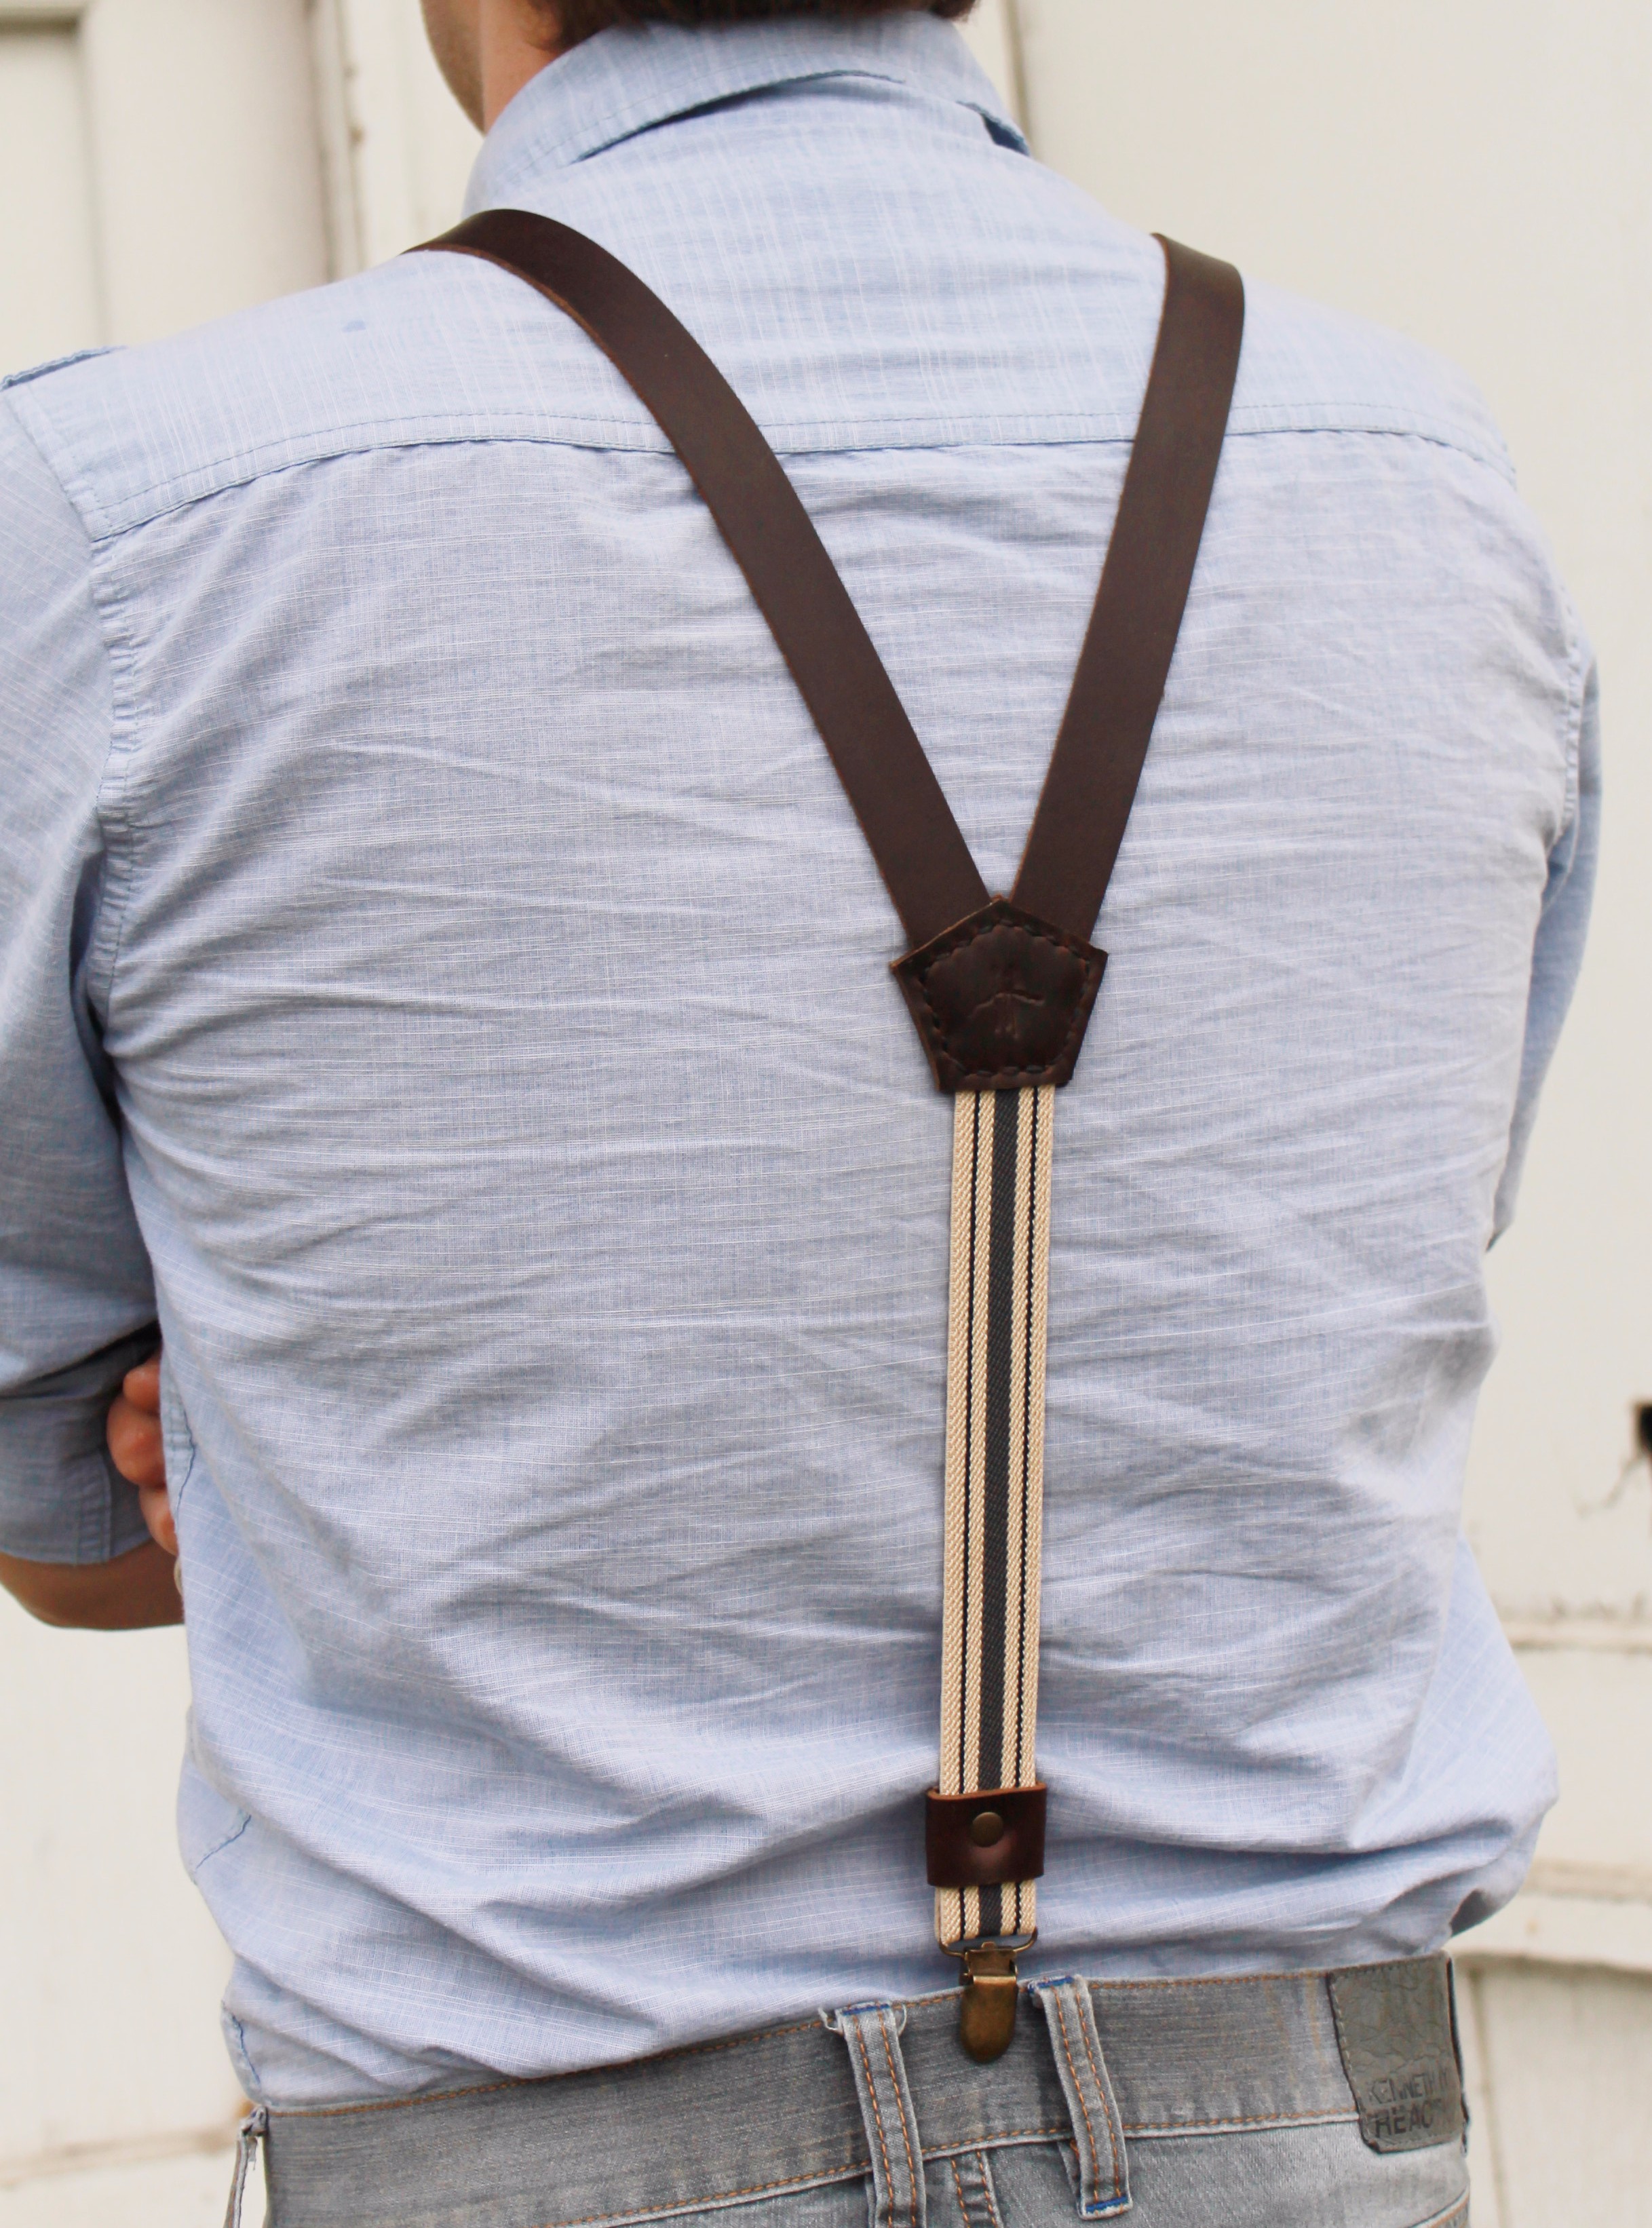 Suspenders! — Beargrass Leather